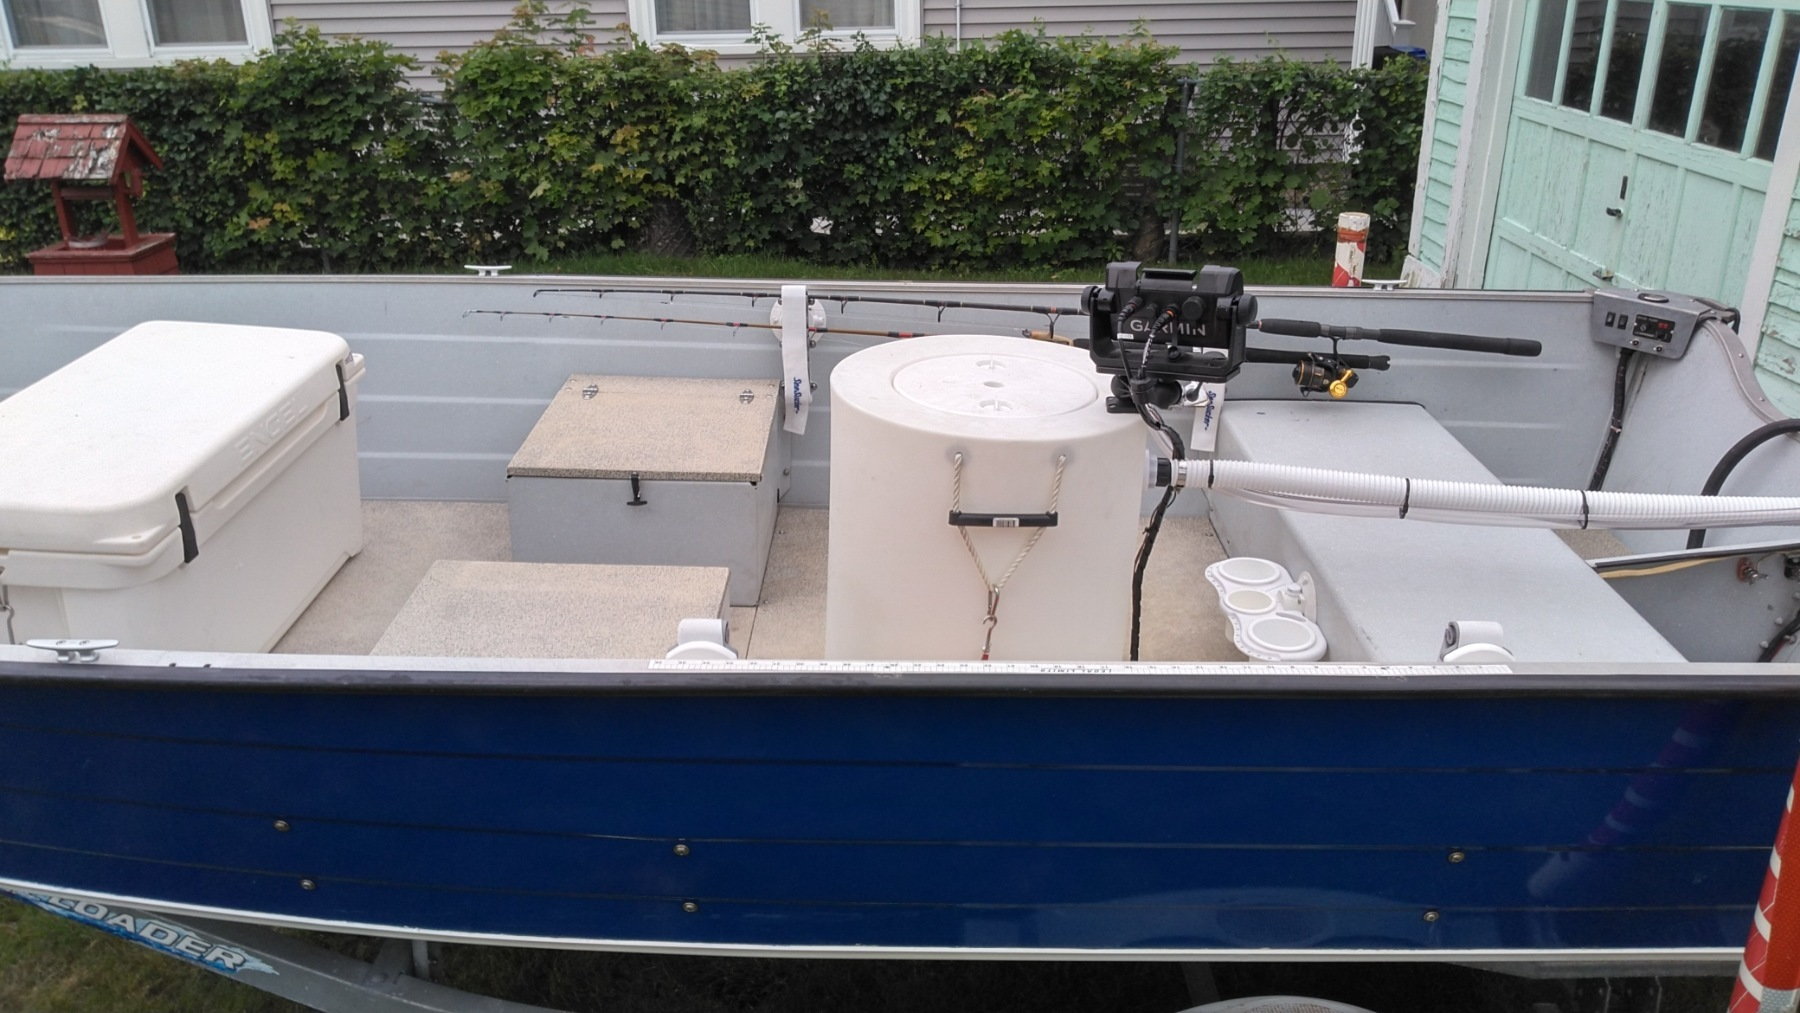 Portable Live well that pulls and release raw water? - The Hull Truth -  Boating and Fishing Forum